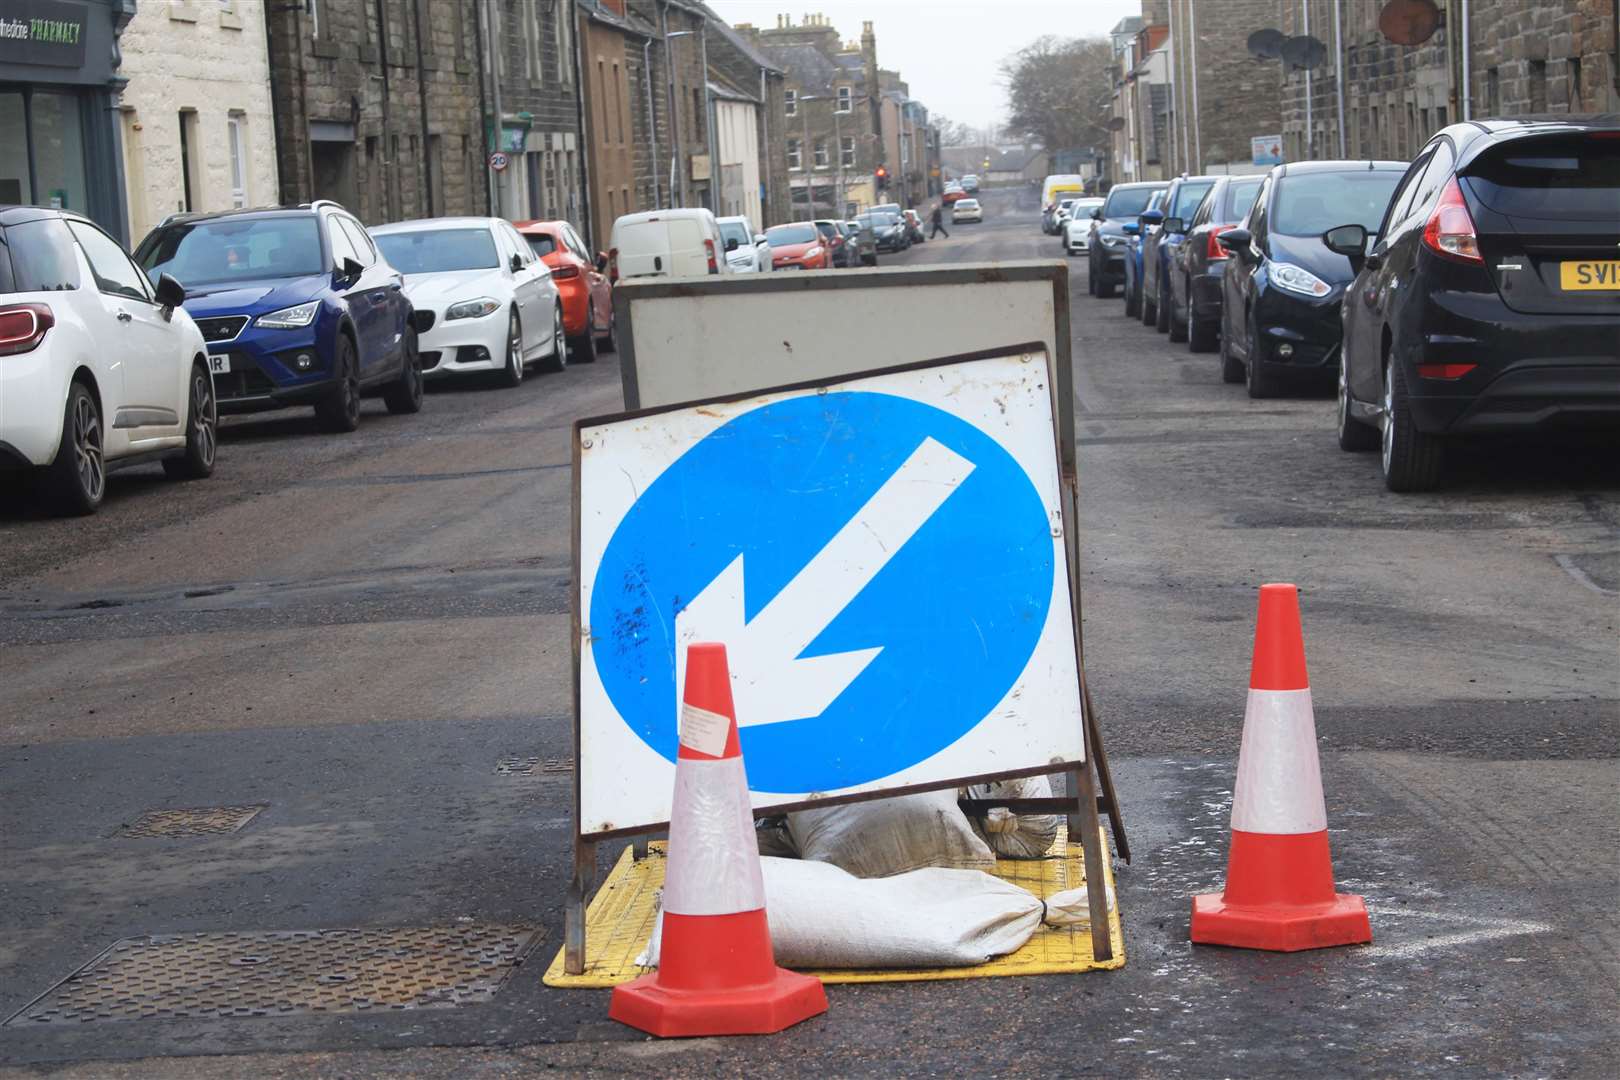 The hole in Dempster Street has been covered up, with traffic cones and 'keep left' signs positioned beside it.